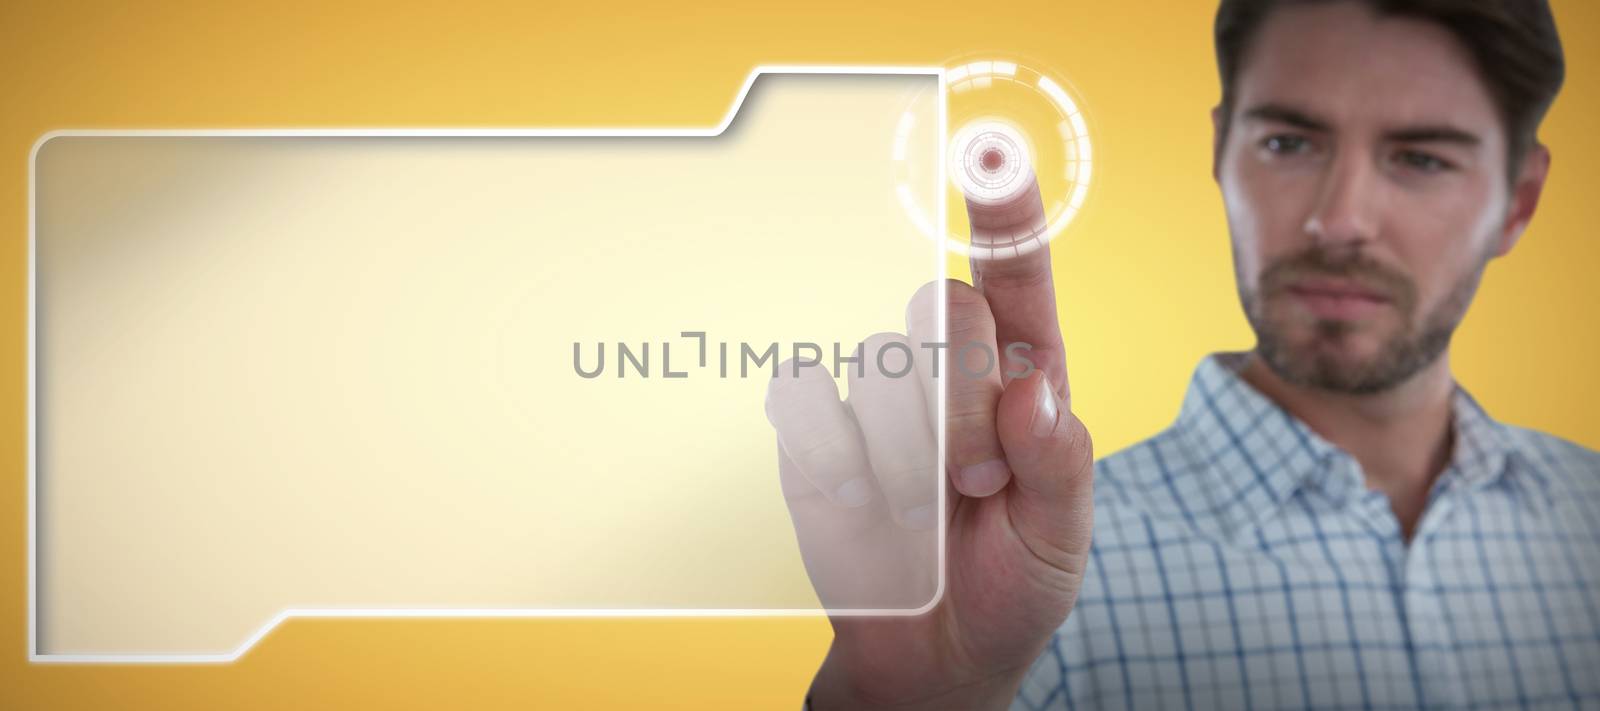 Man pretending to touch an invisible screen against abstract yellow background